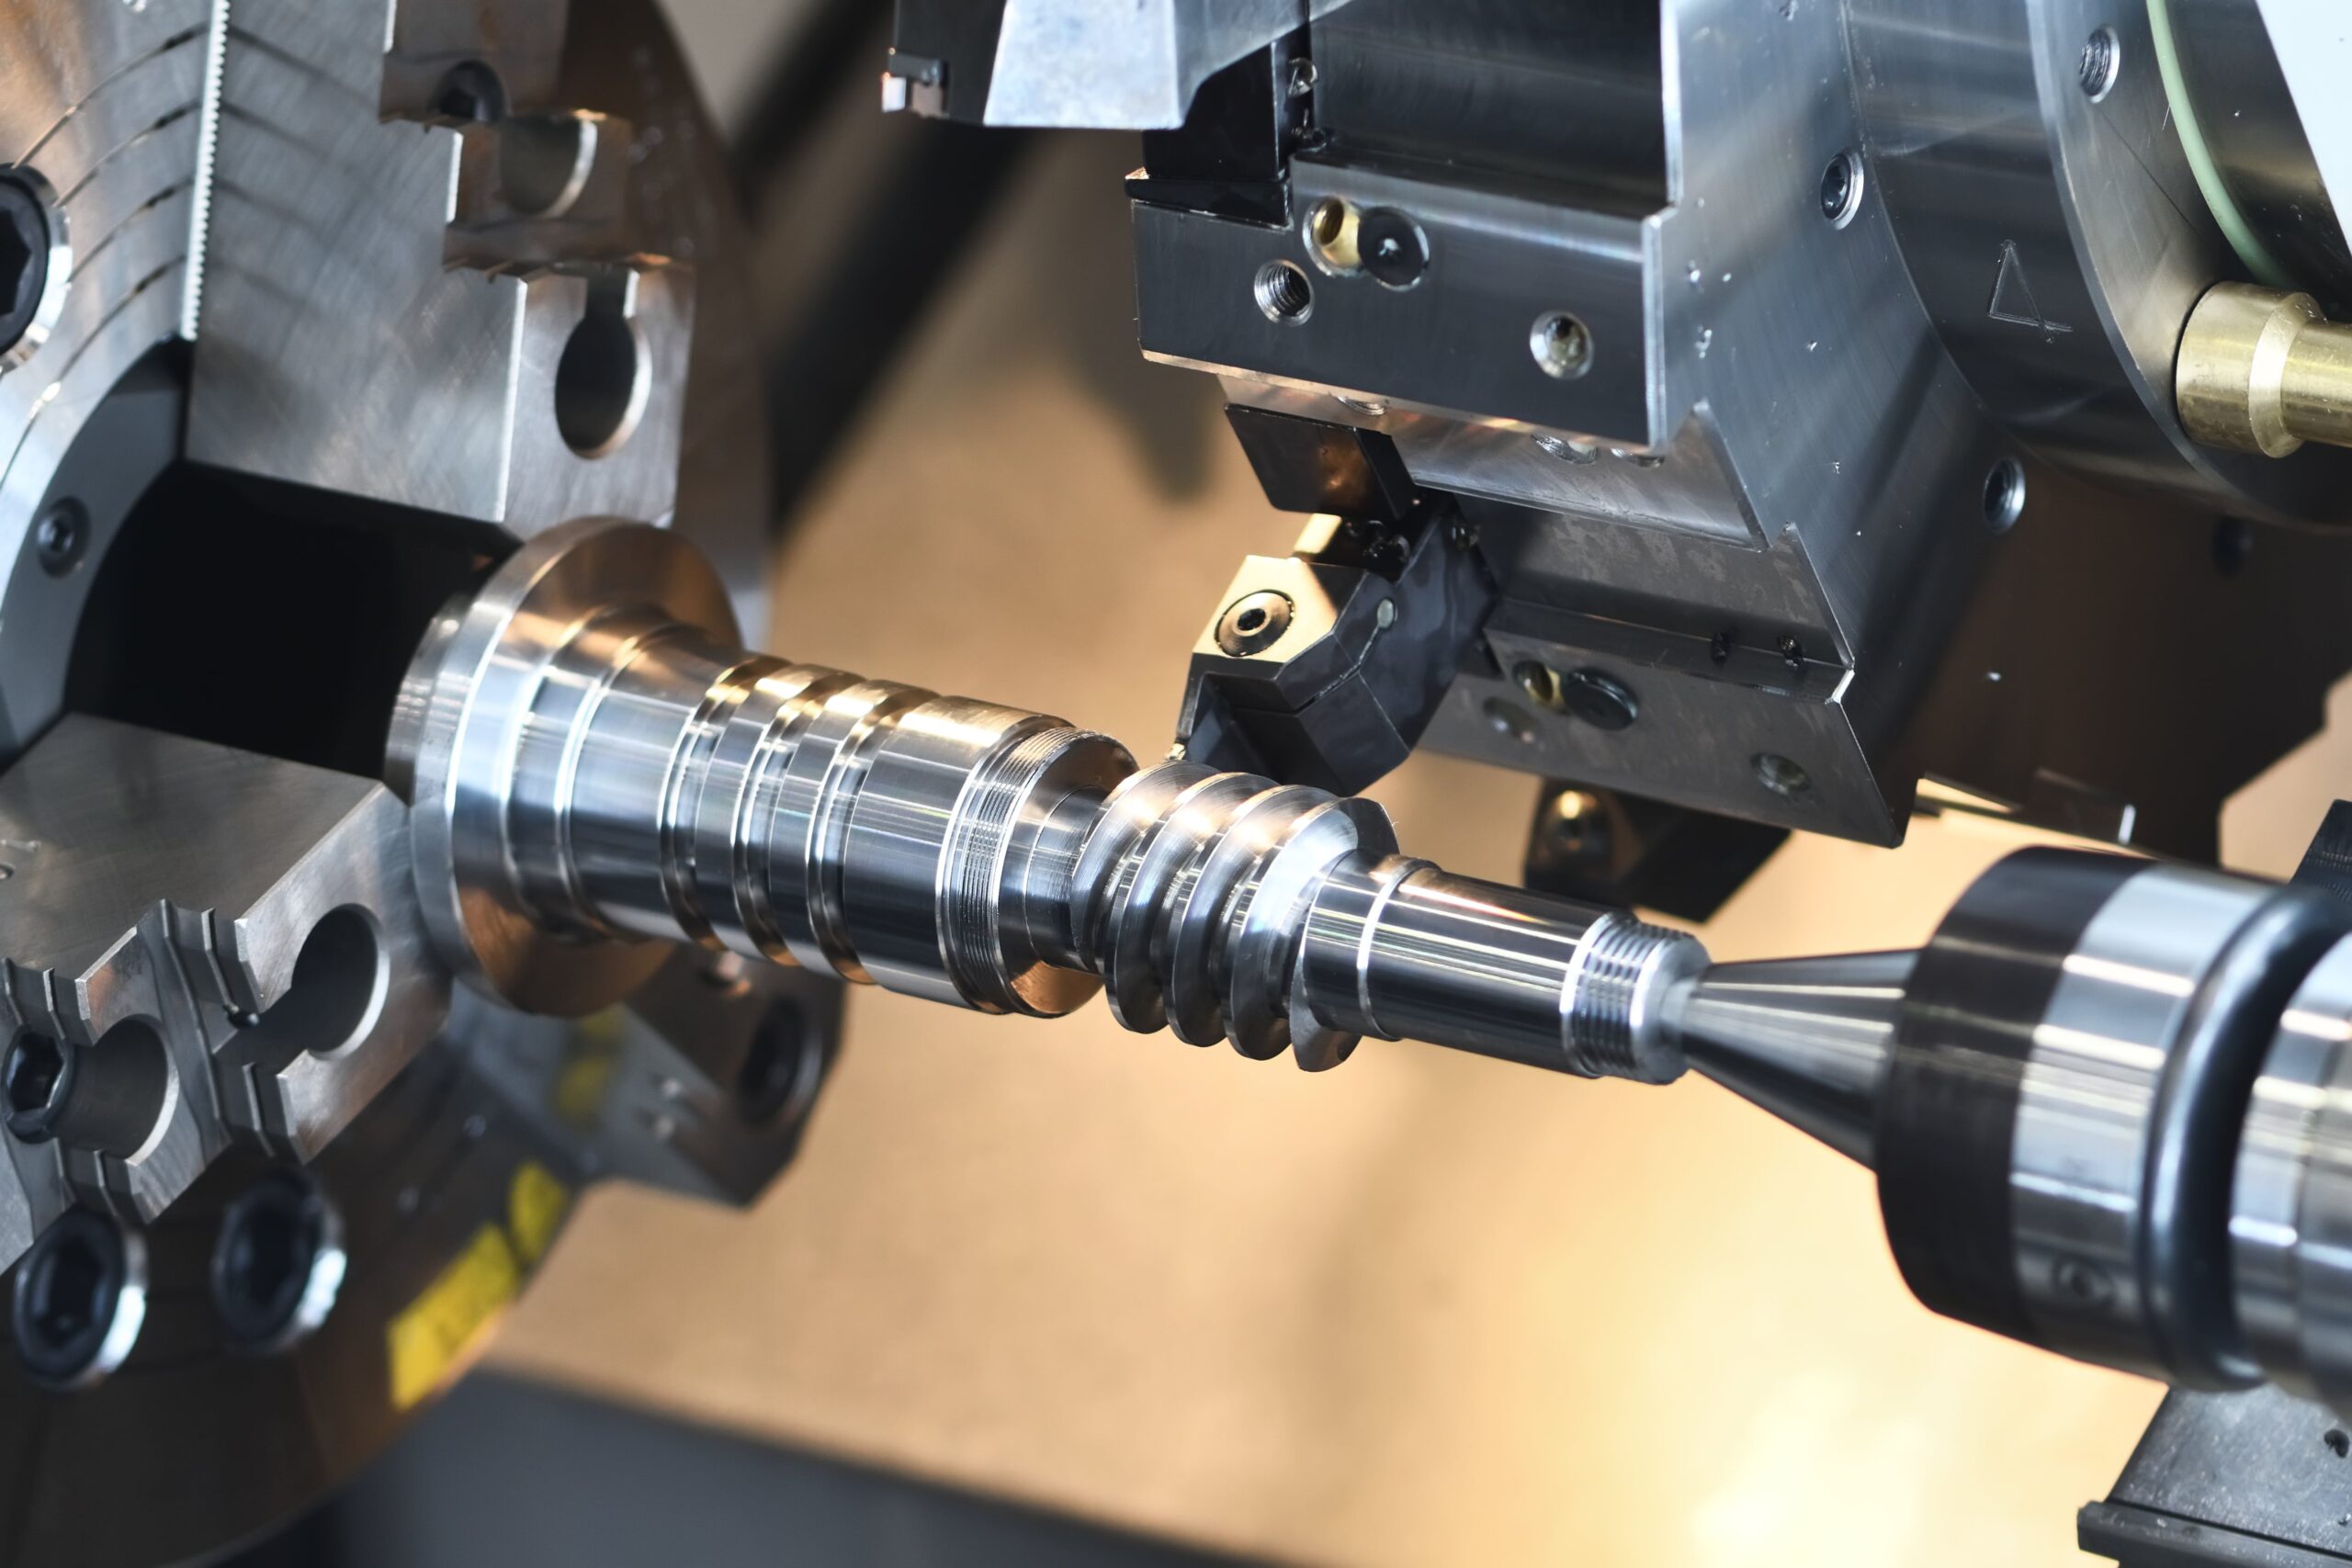 Machine shop milling machine using CNC programming to produce highly specialized parts.